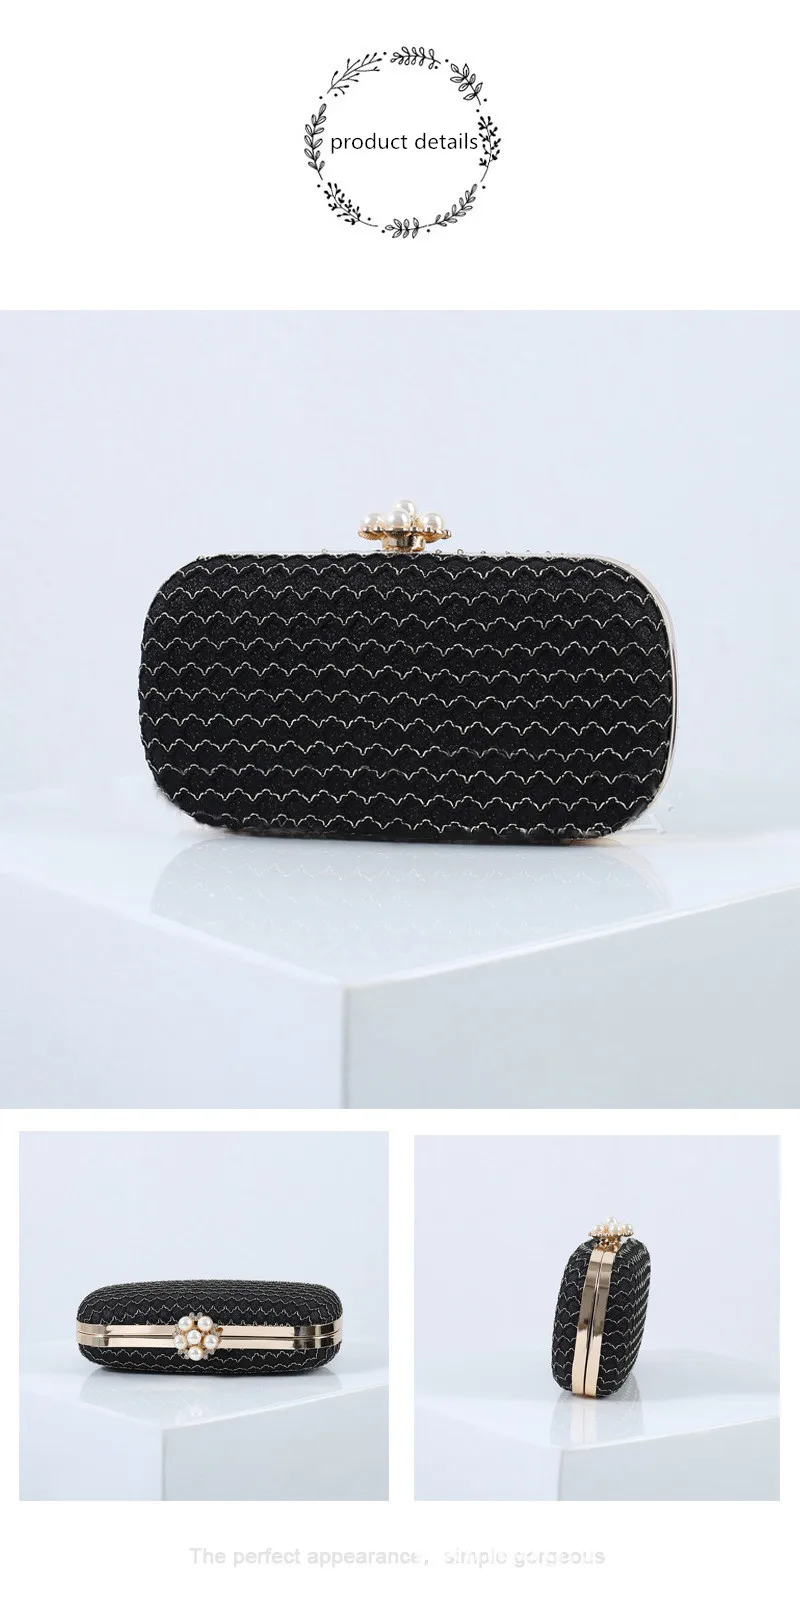 Luxy Moon Black Sequin Corrugated Evening Bag Front View